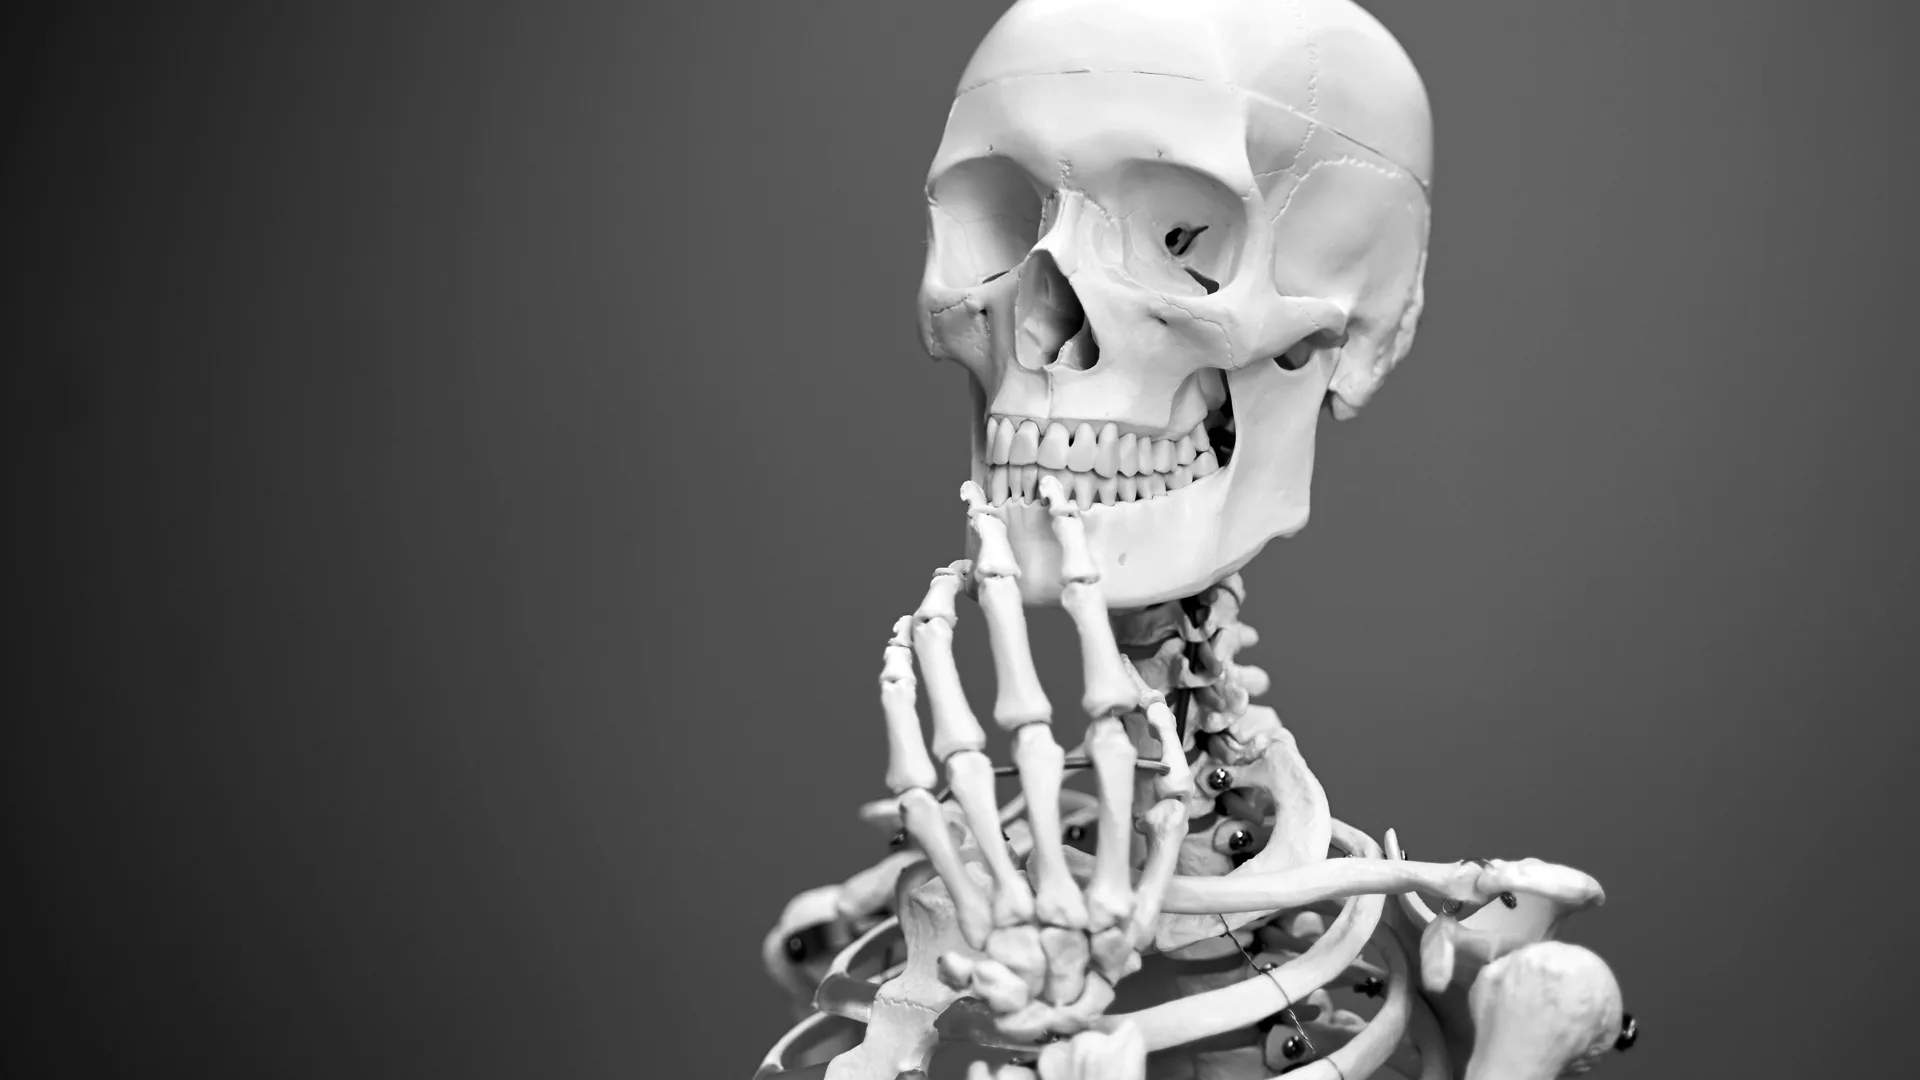 Photograph of a skeleton in a thoughtful post against a grey background